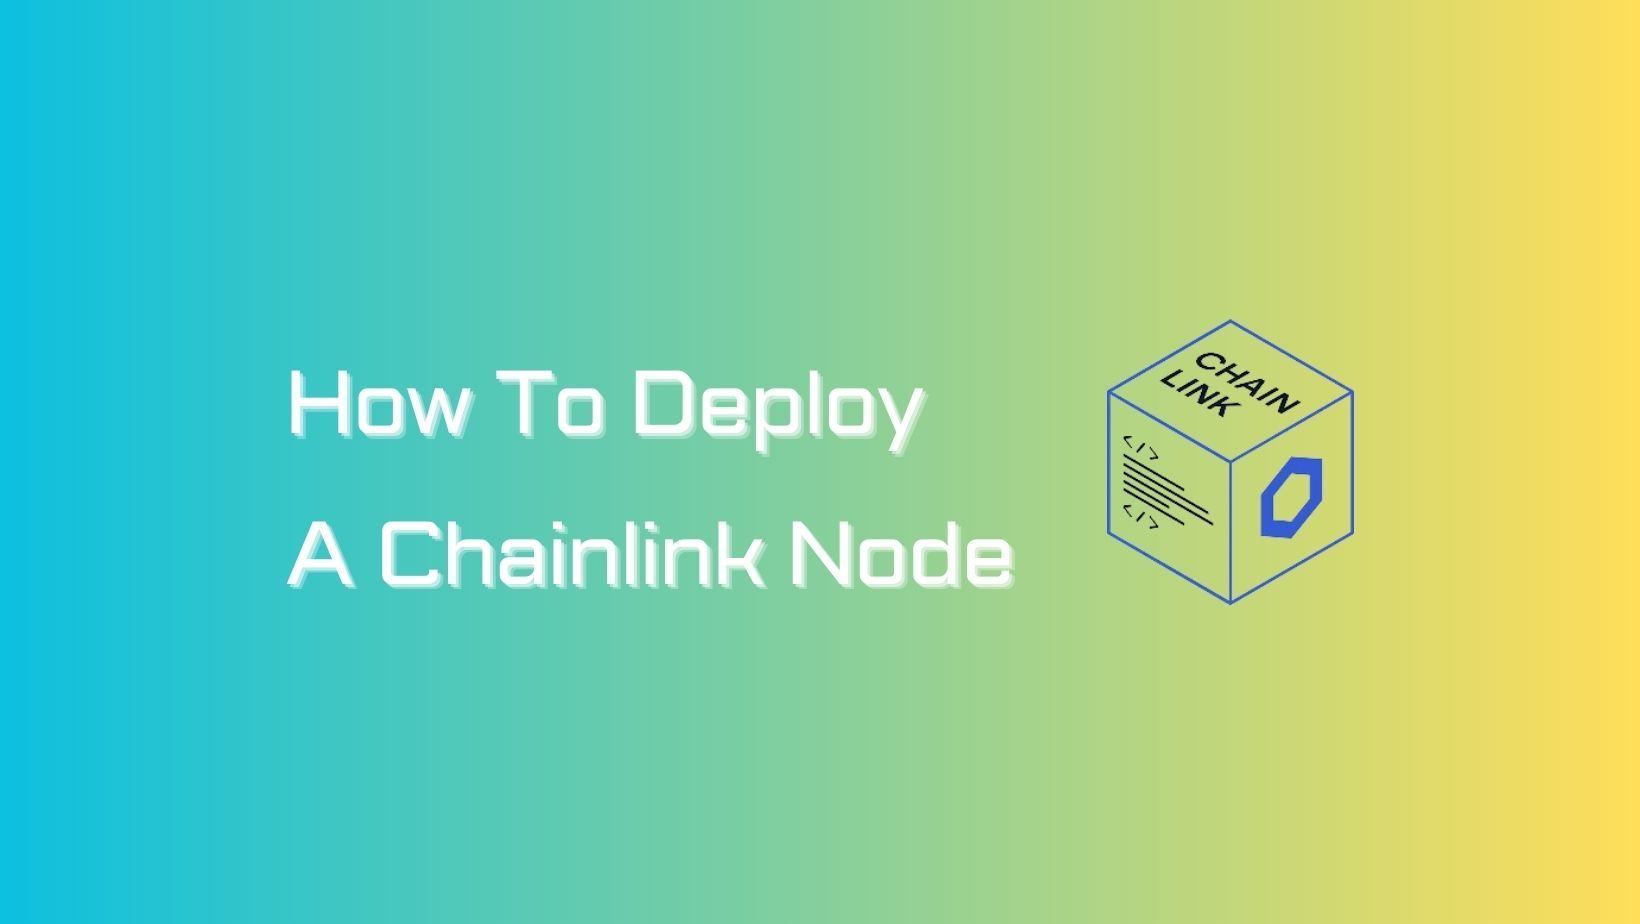 How to Deploy a Chainlink Node